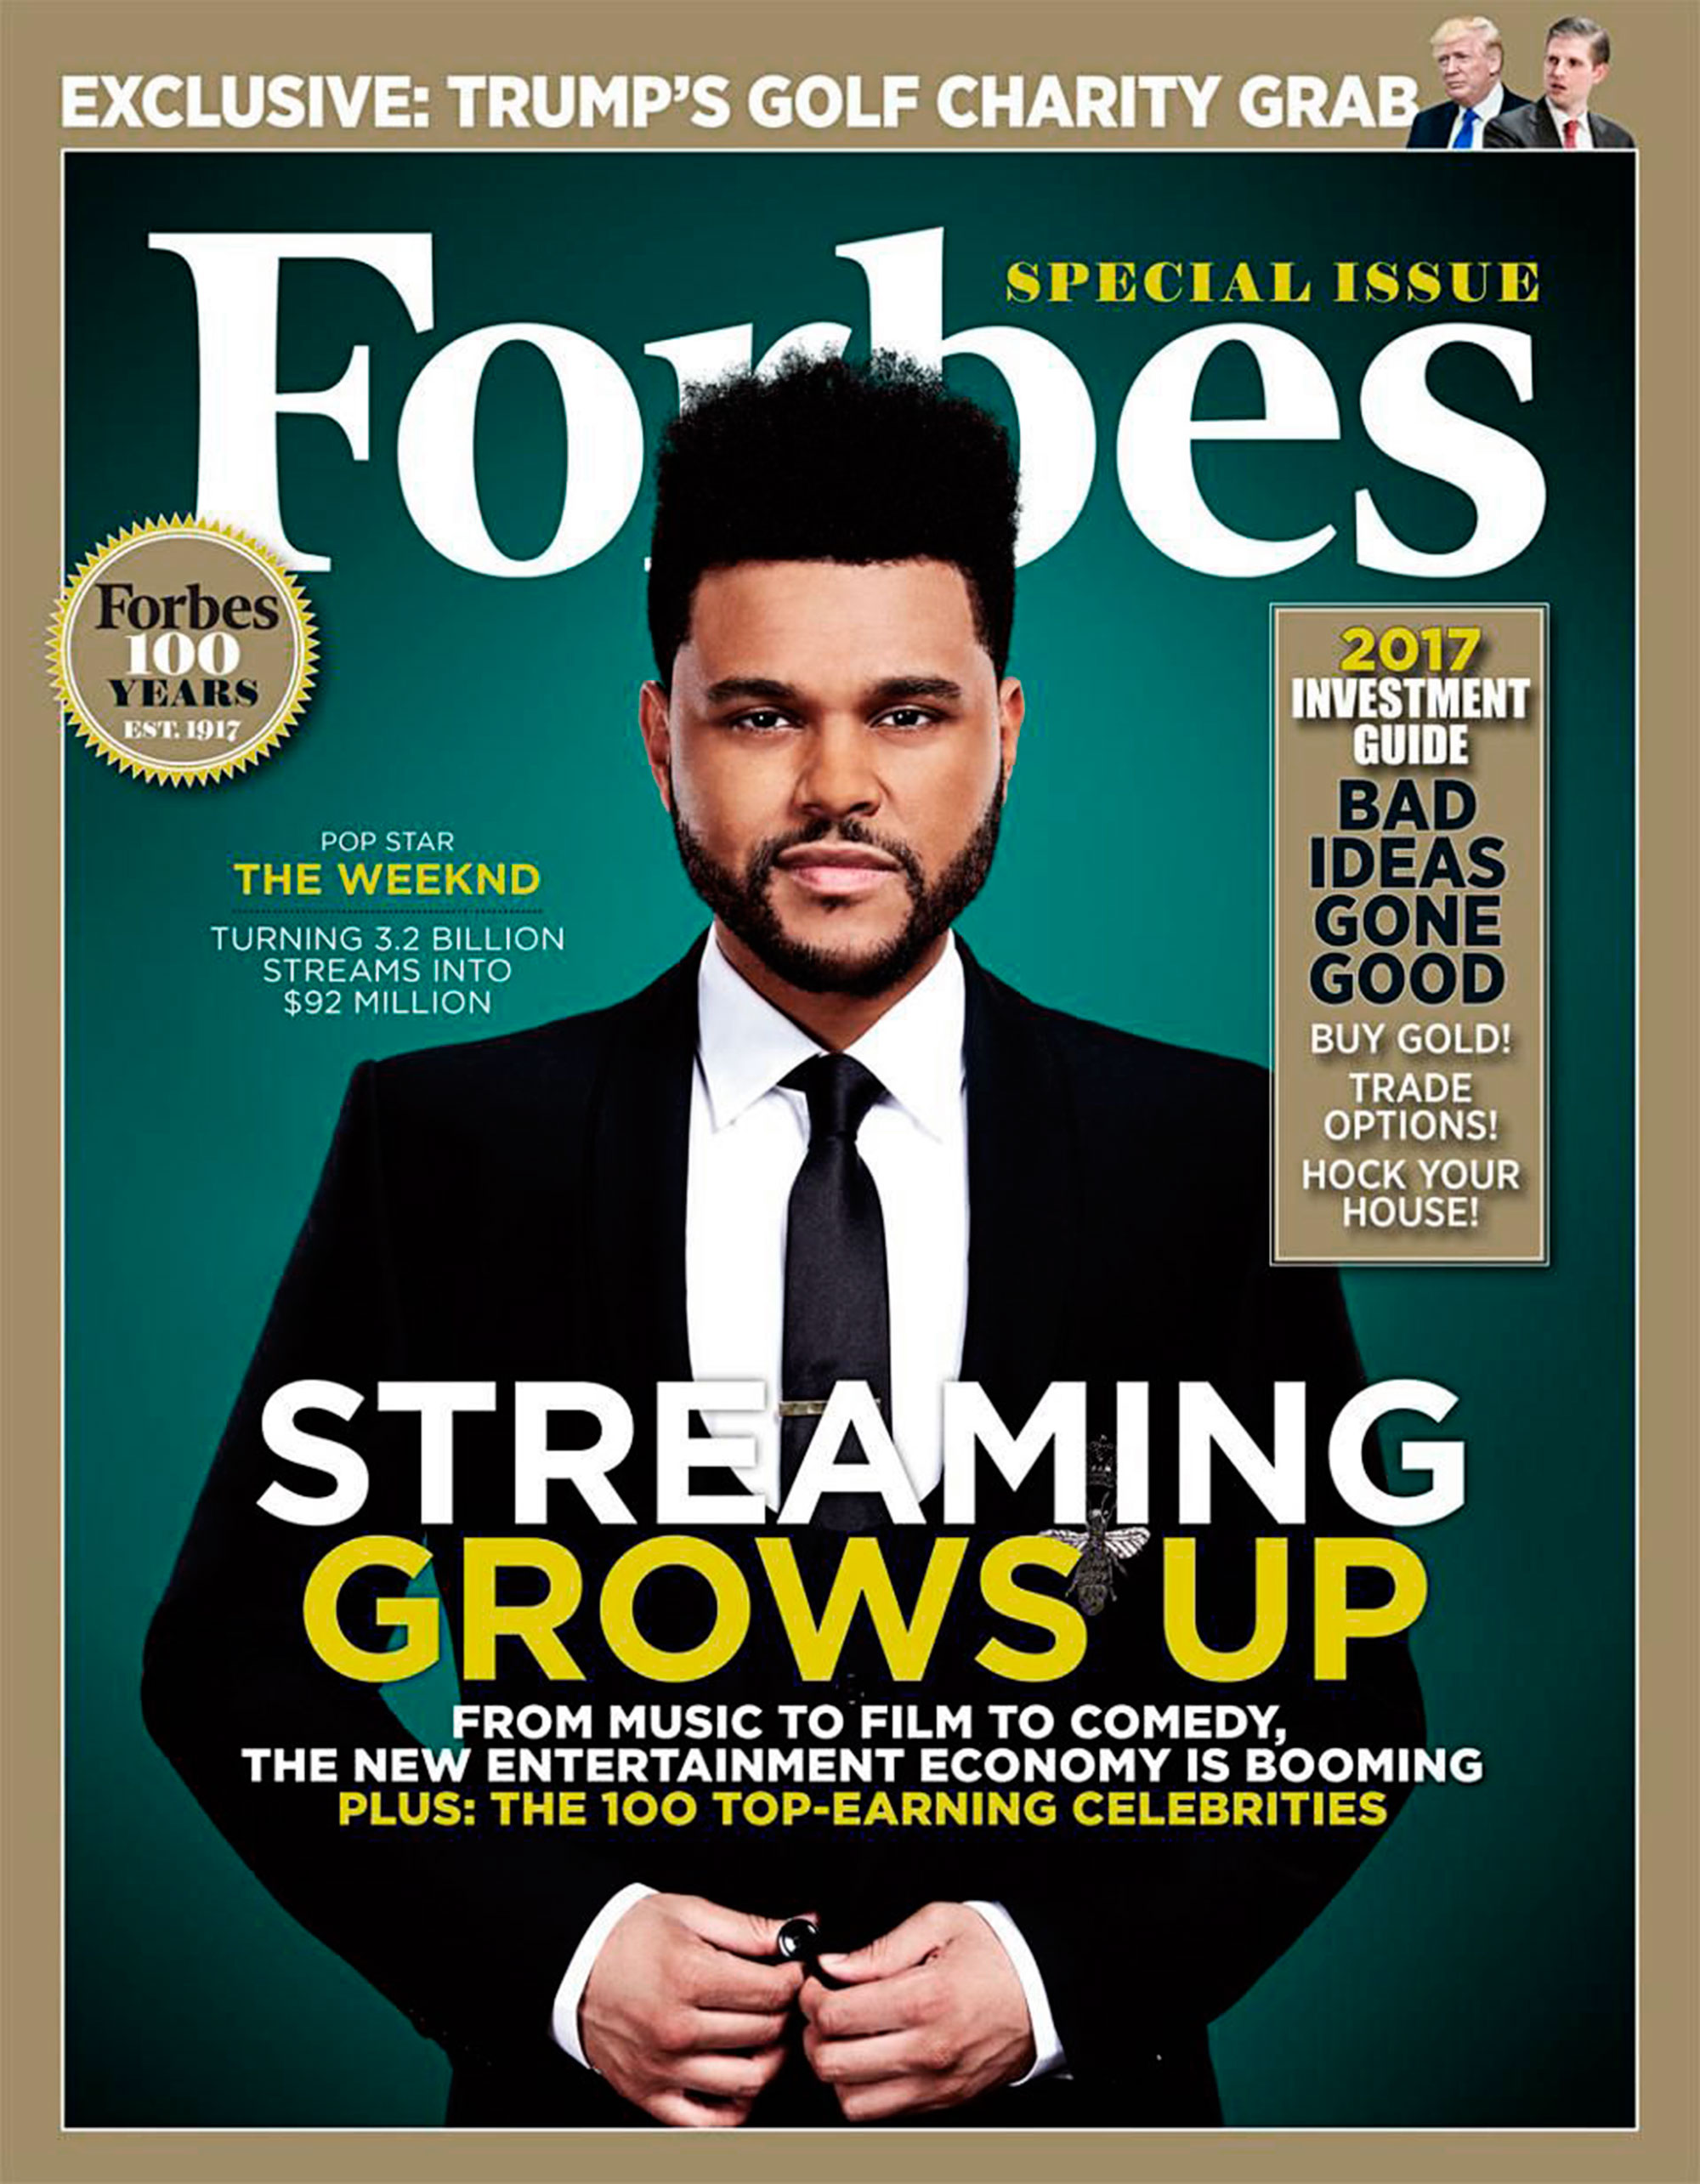 TheWeeknd_Forbes